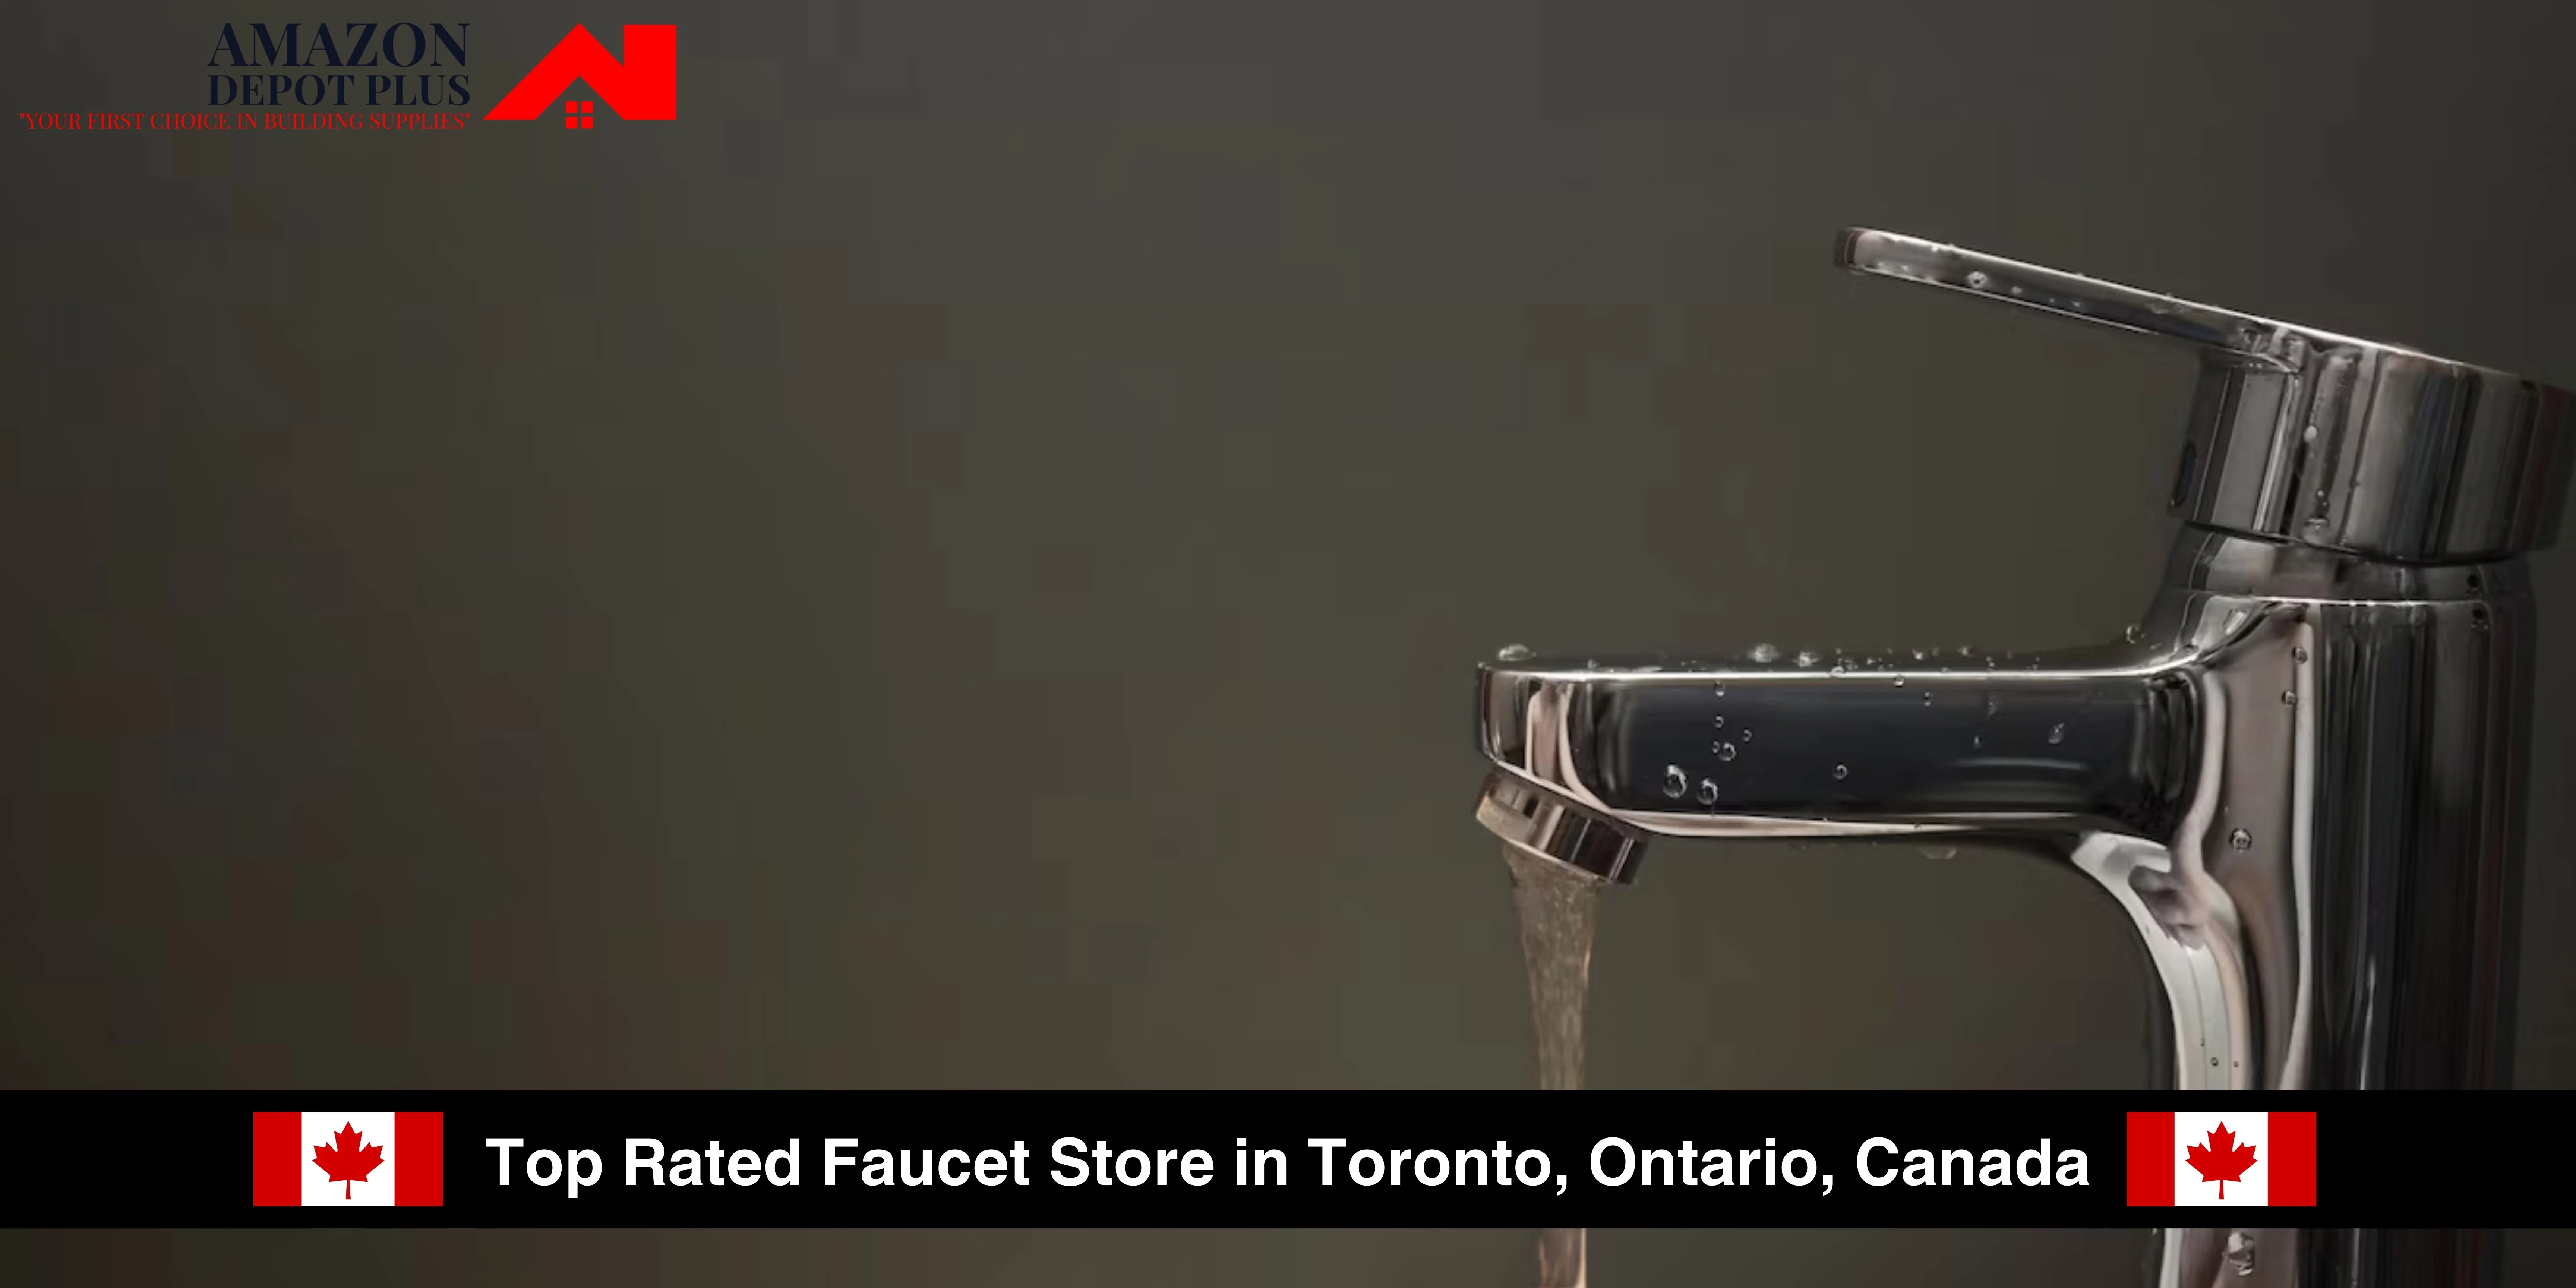 Top Rated Faucet Store in Toronto, Ontario, Canada